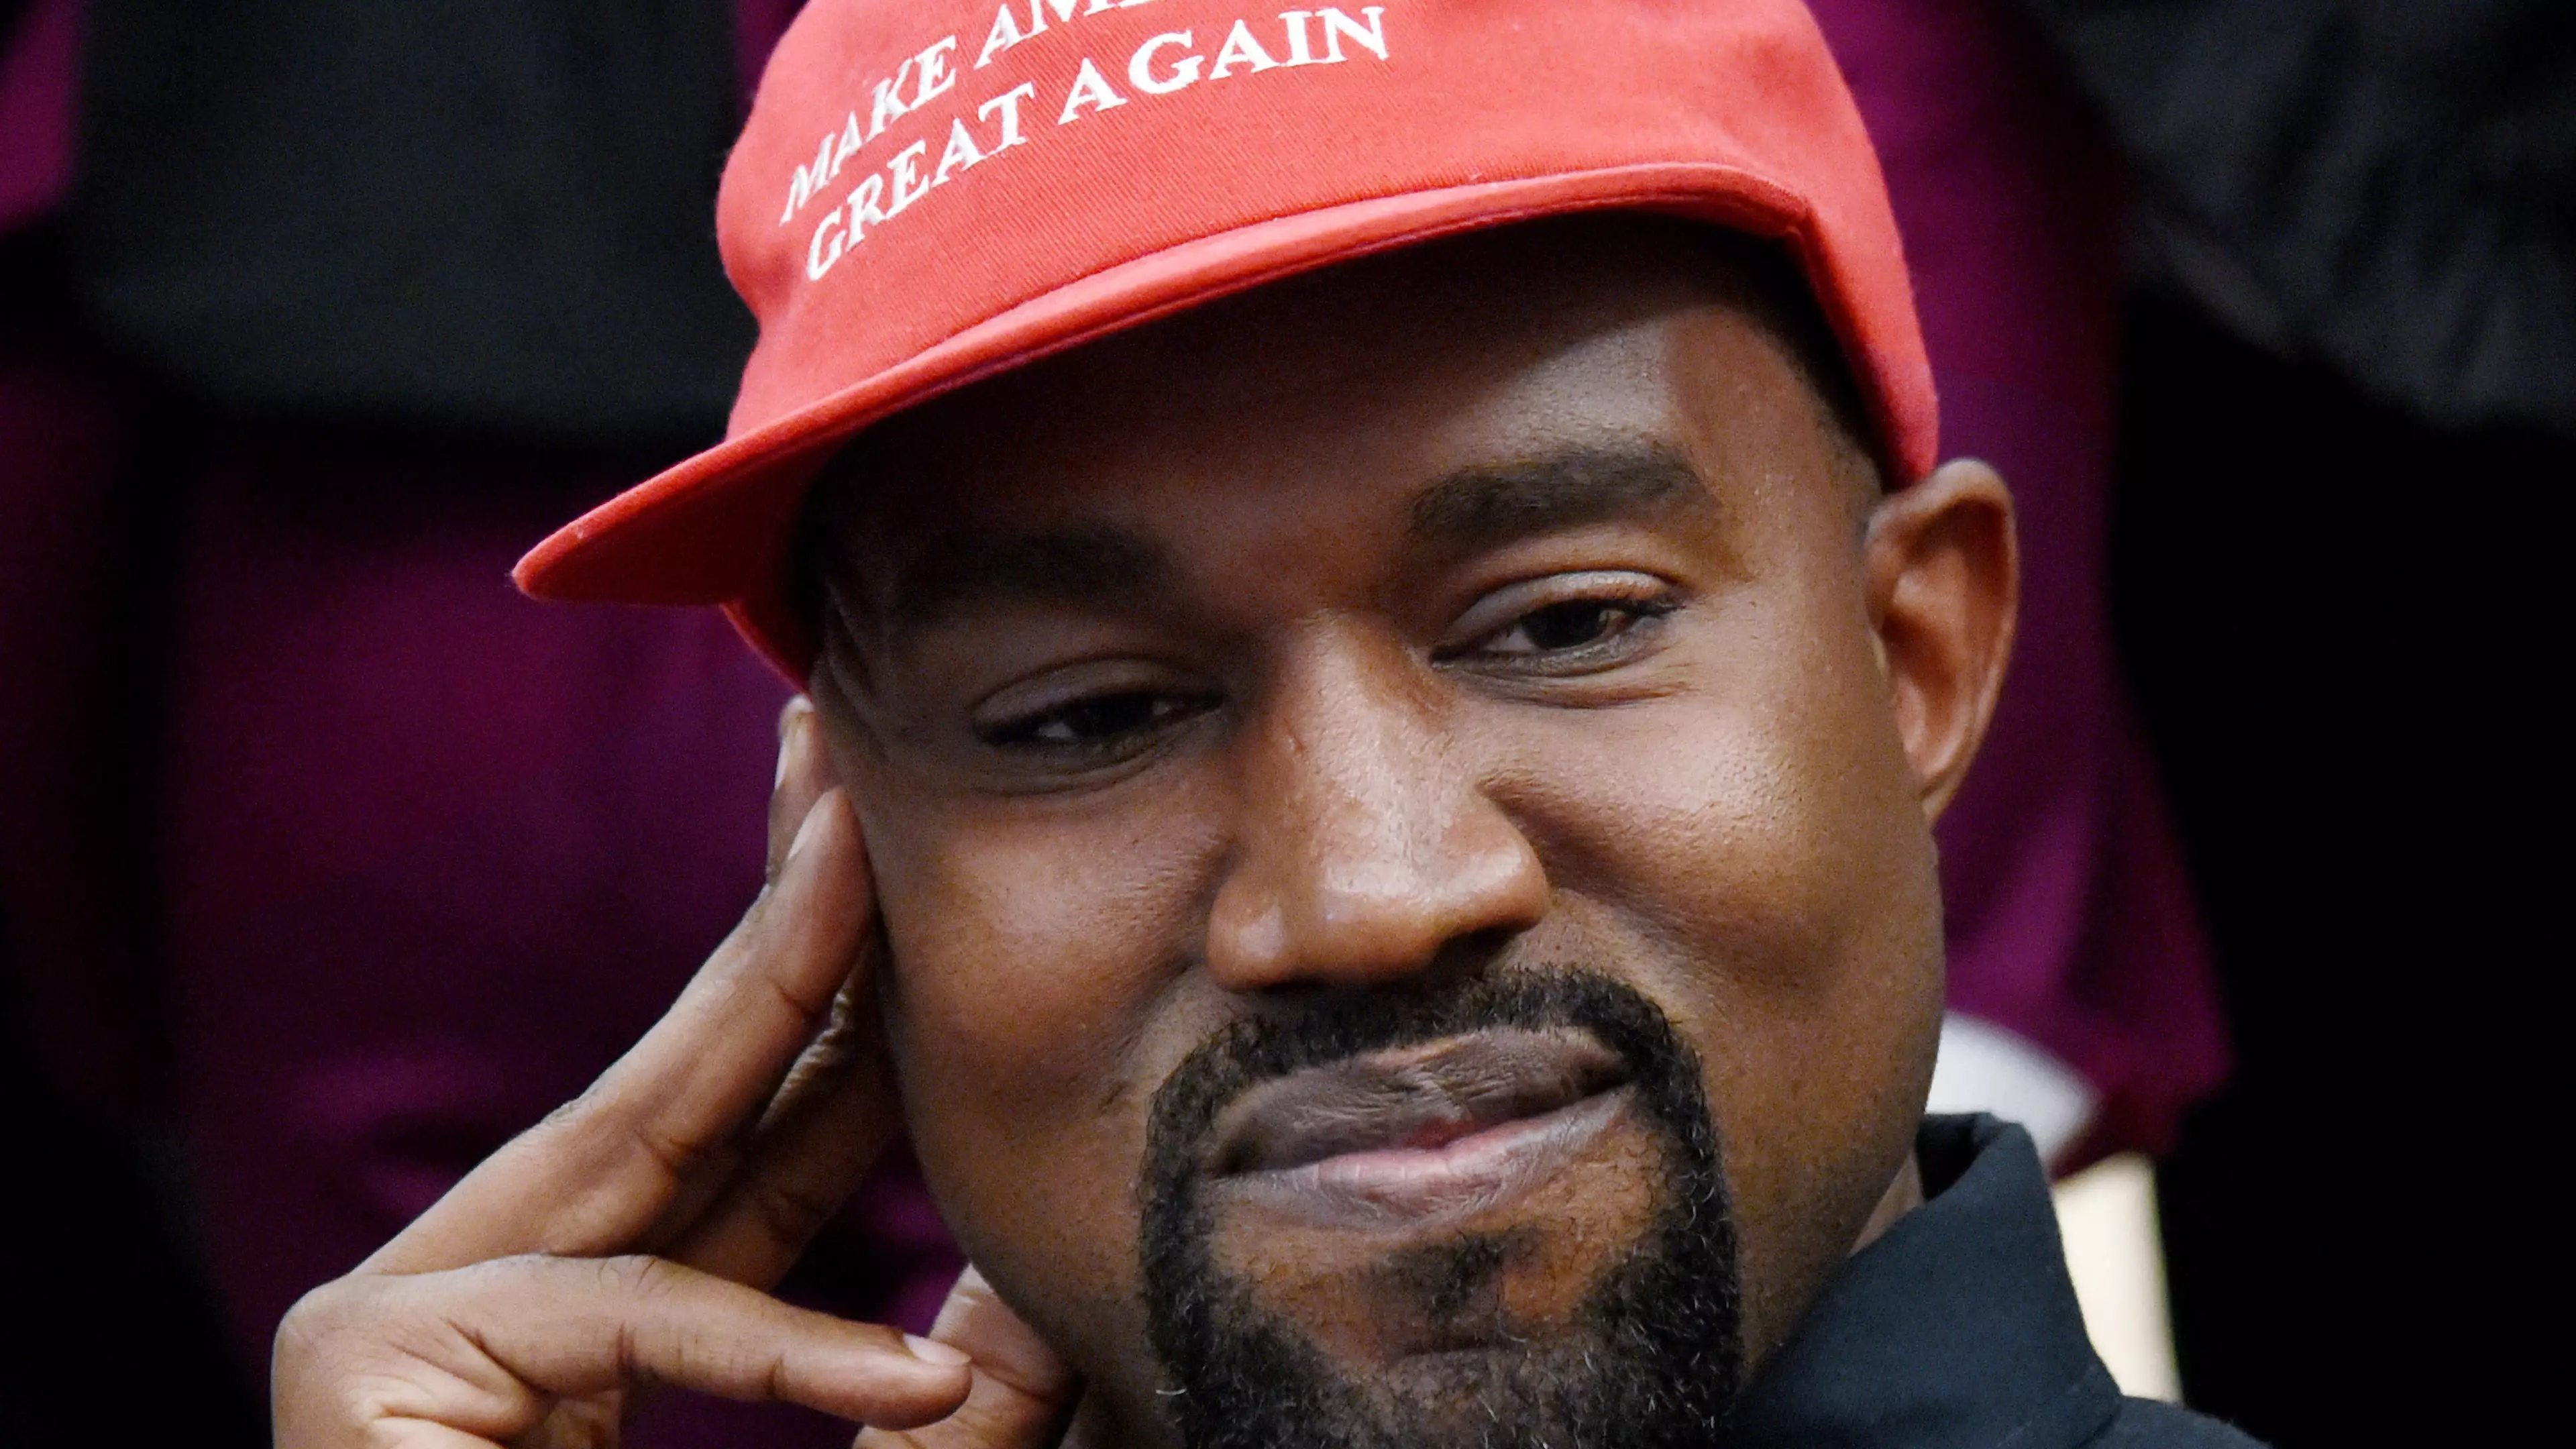 Kanye West Reveals His Anti-Vaxx And Anti-Abortion Stance For US Presidential Bid